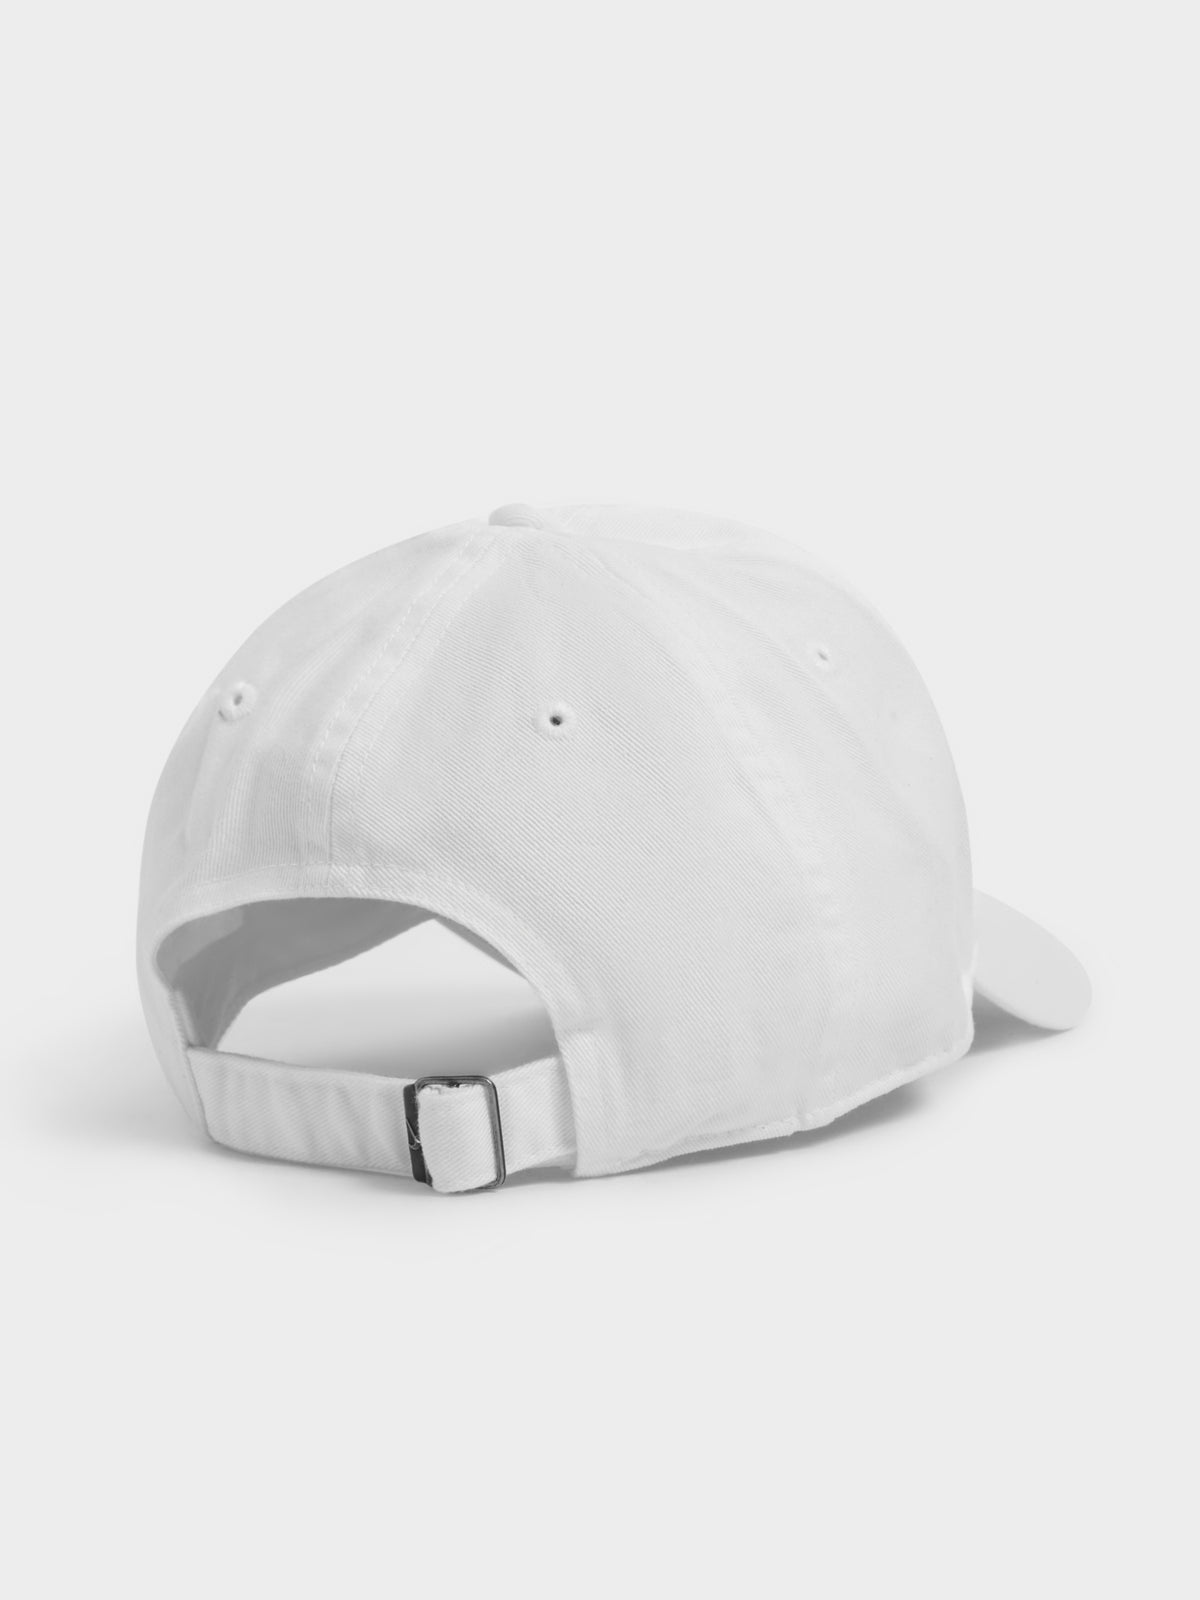 Heritage 86 Futura Cap in Washed White